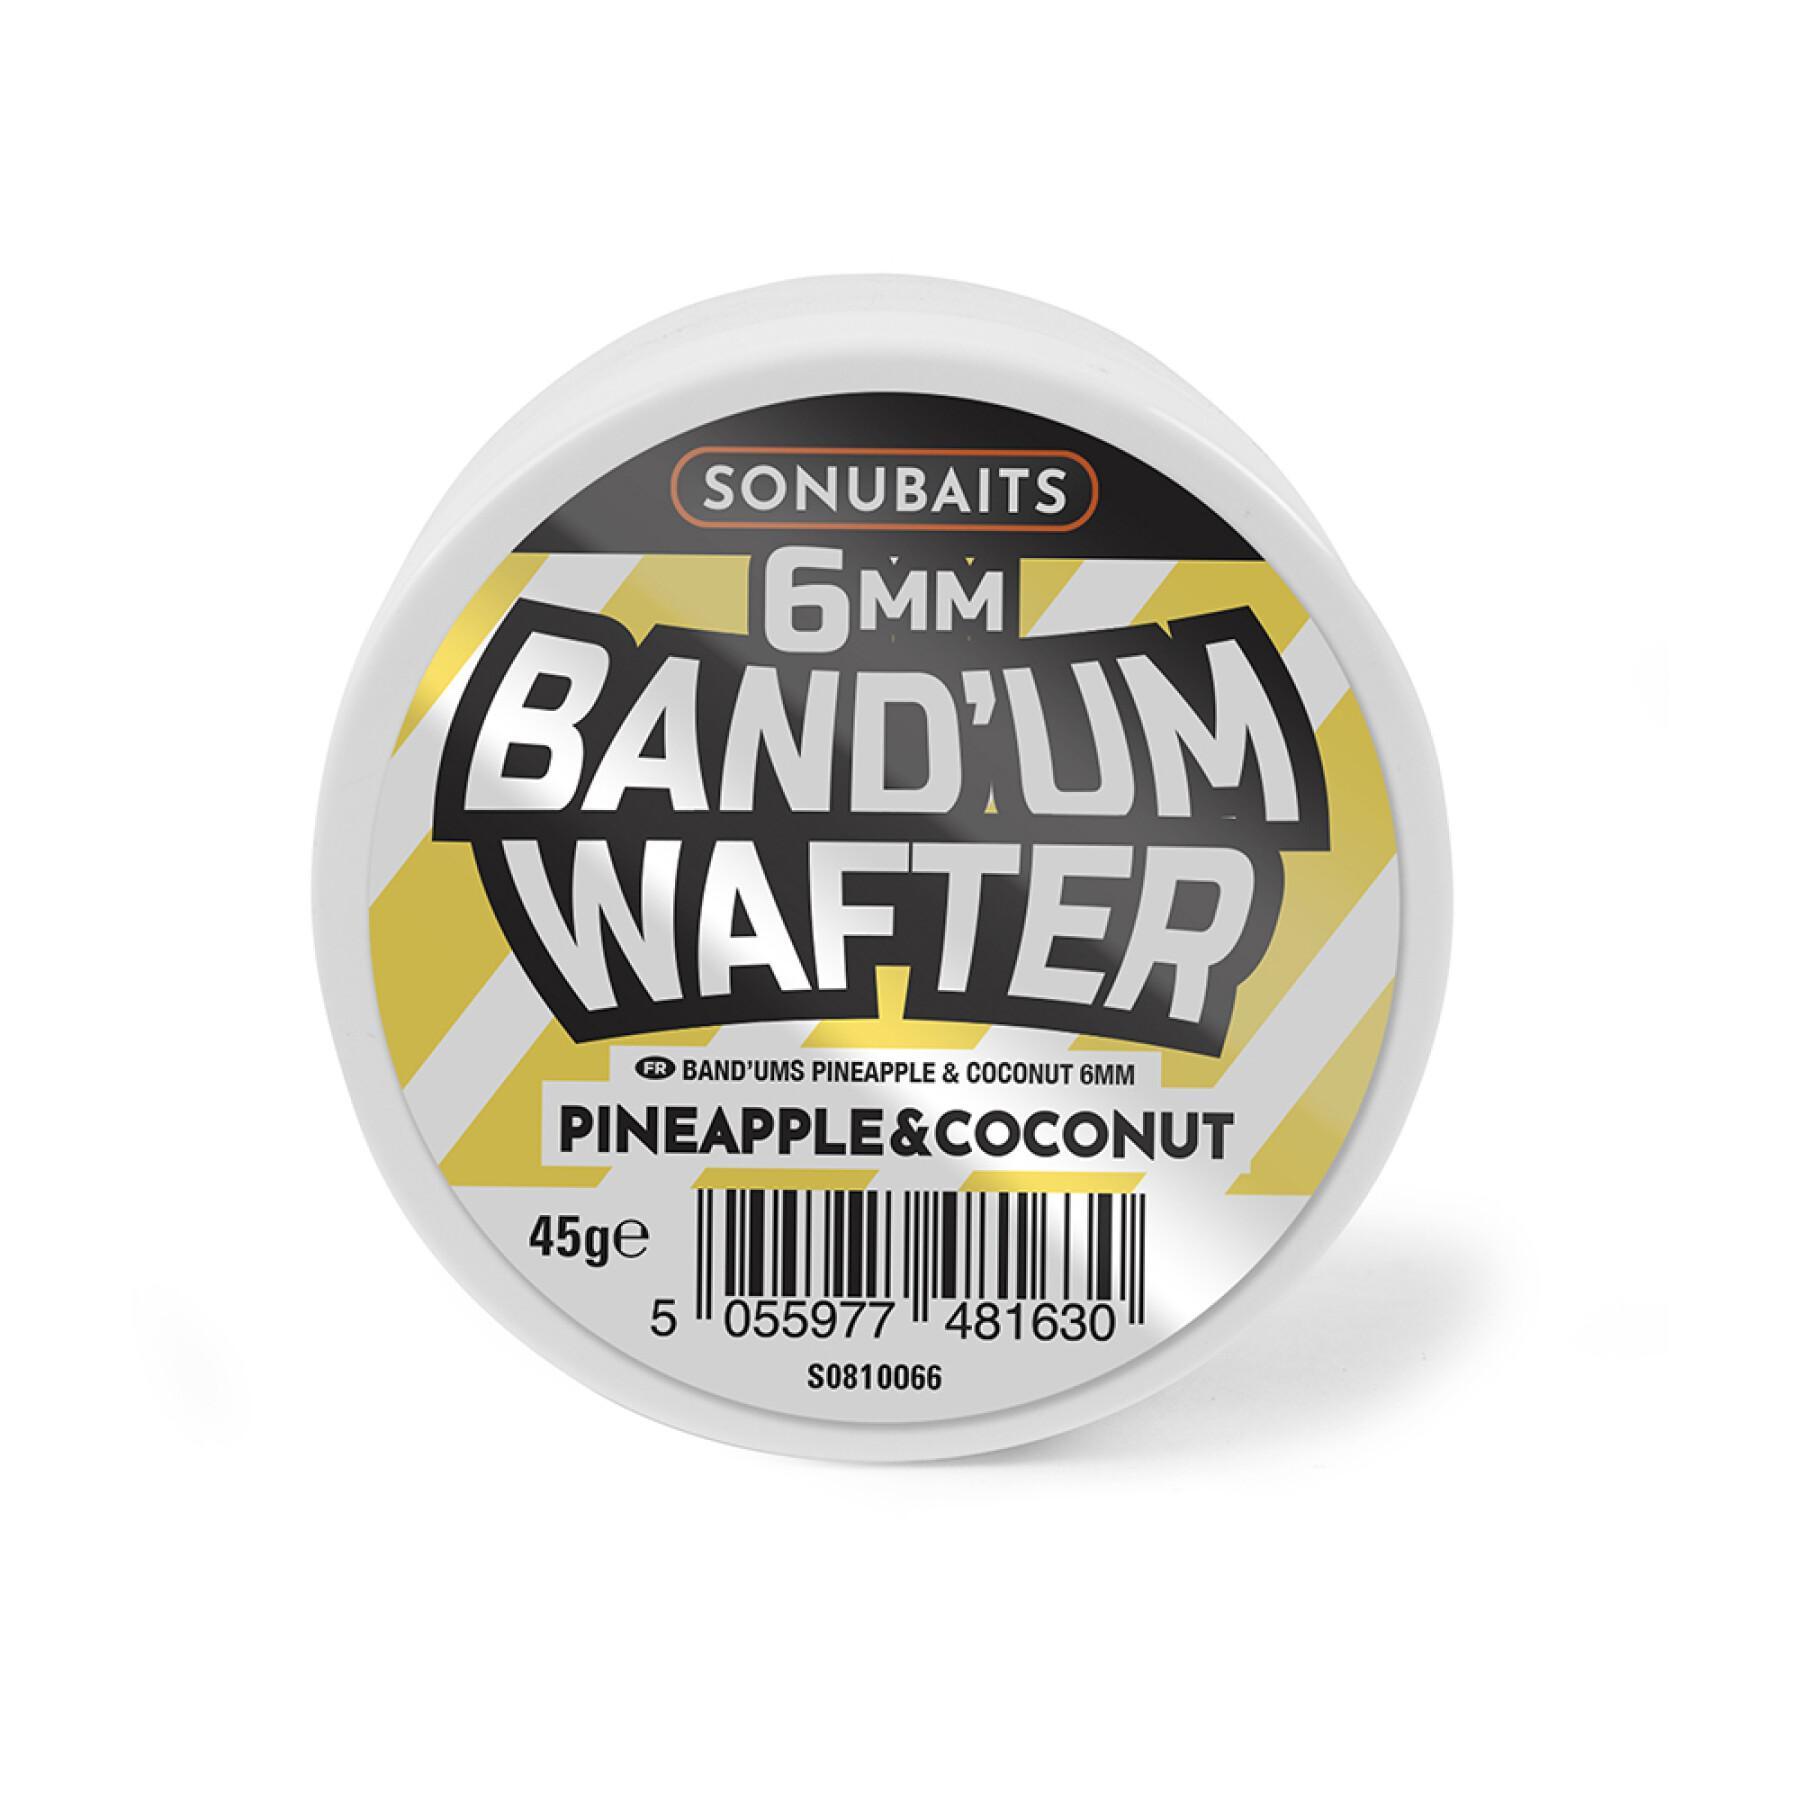 Pellet Sonubaits band'um wafters pineapple & coconut 1x8